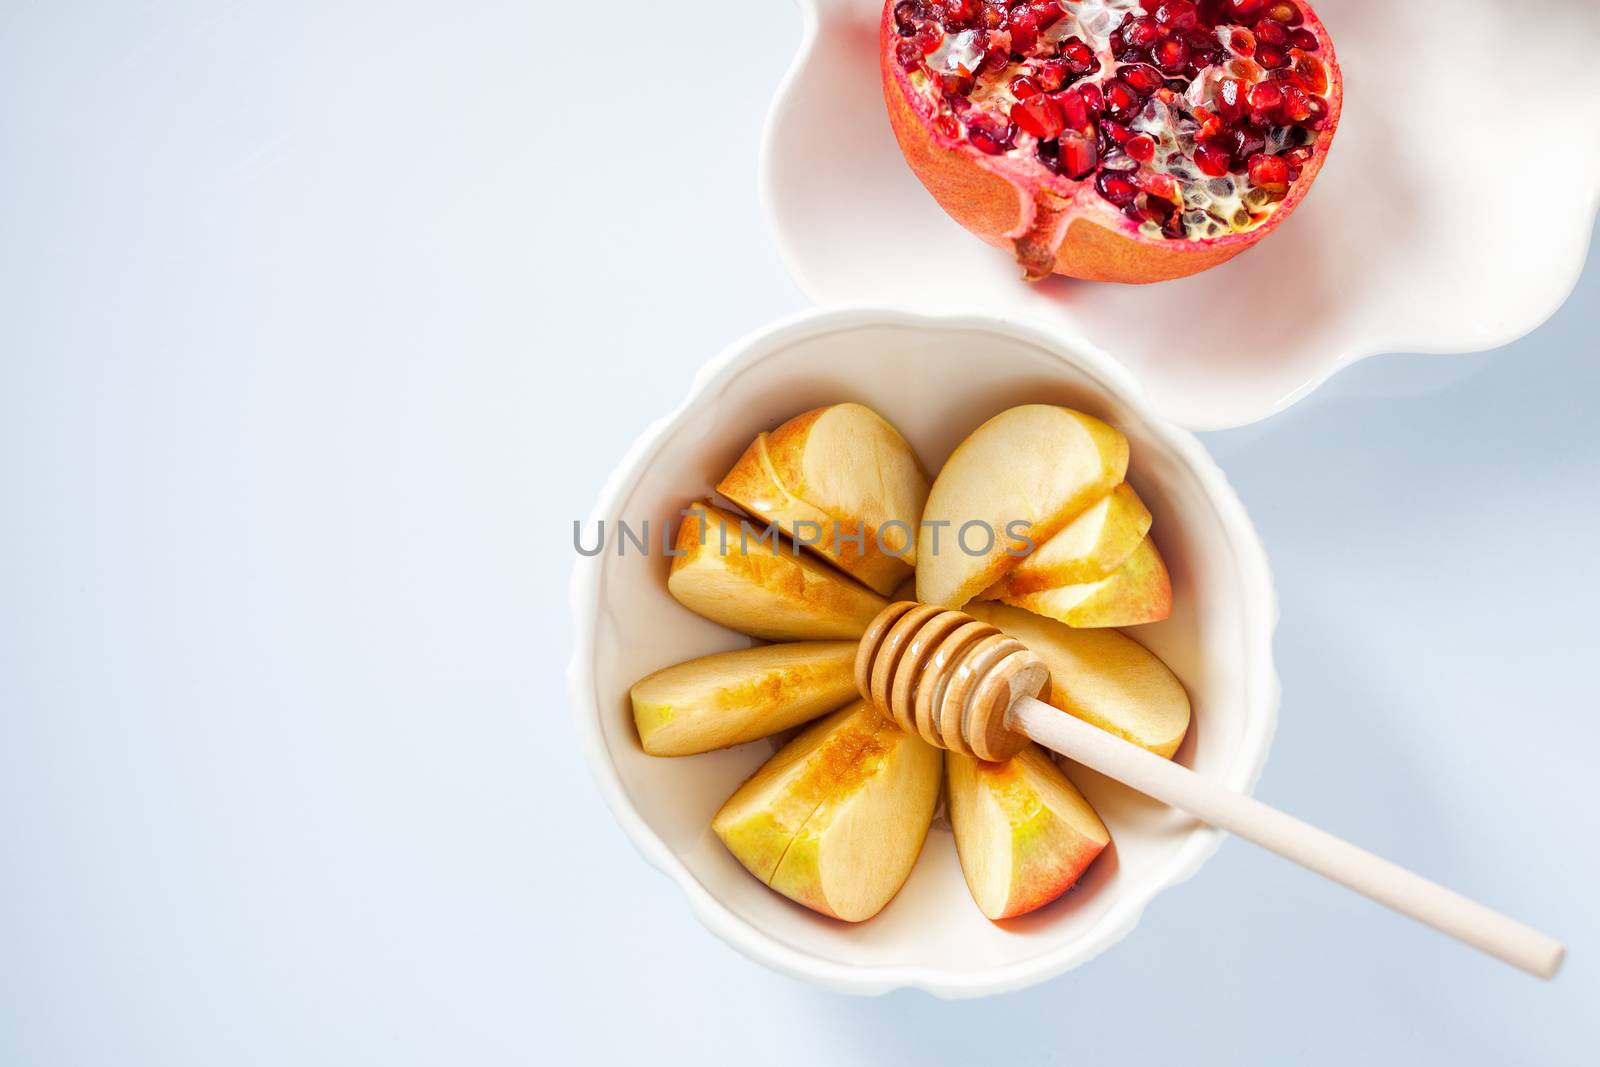 Apples, pomegranate and honey for Rosh Hashanah by supercat67